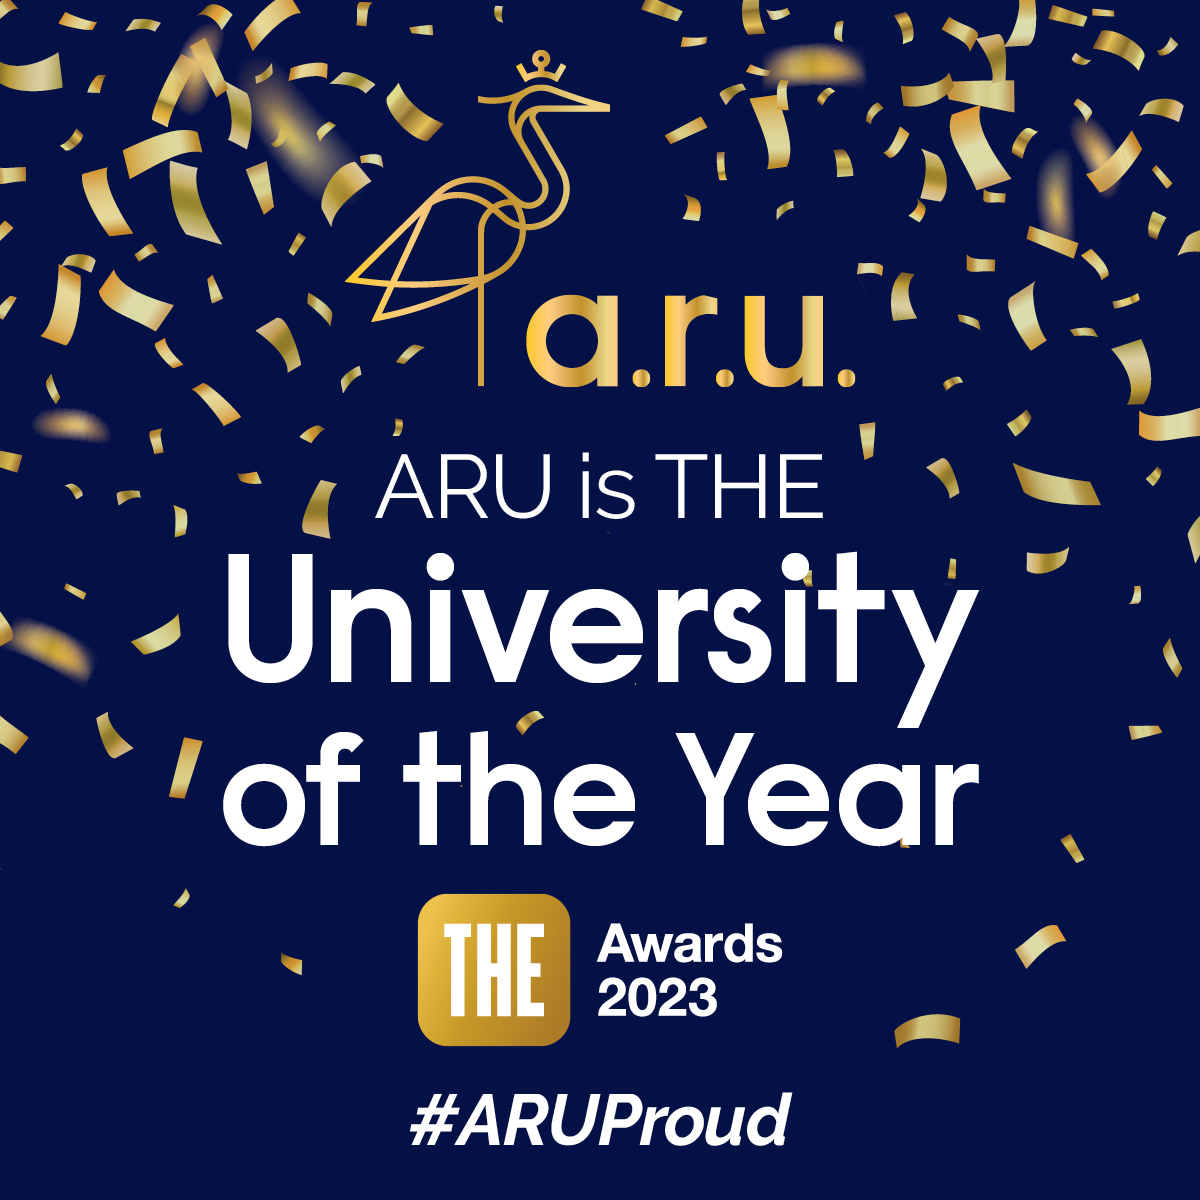 ARU is the University of the year